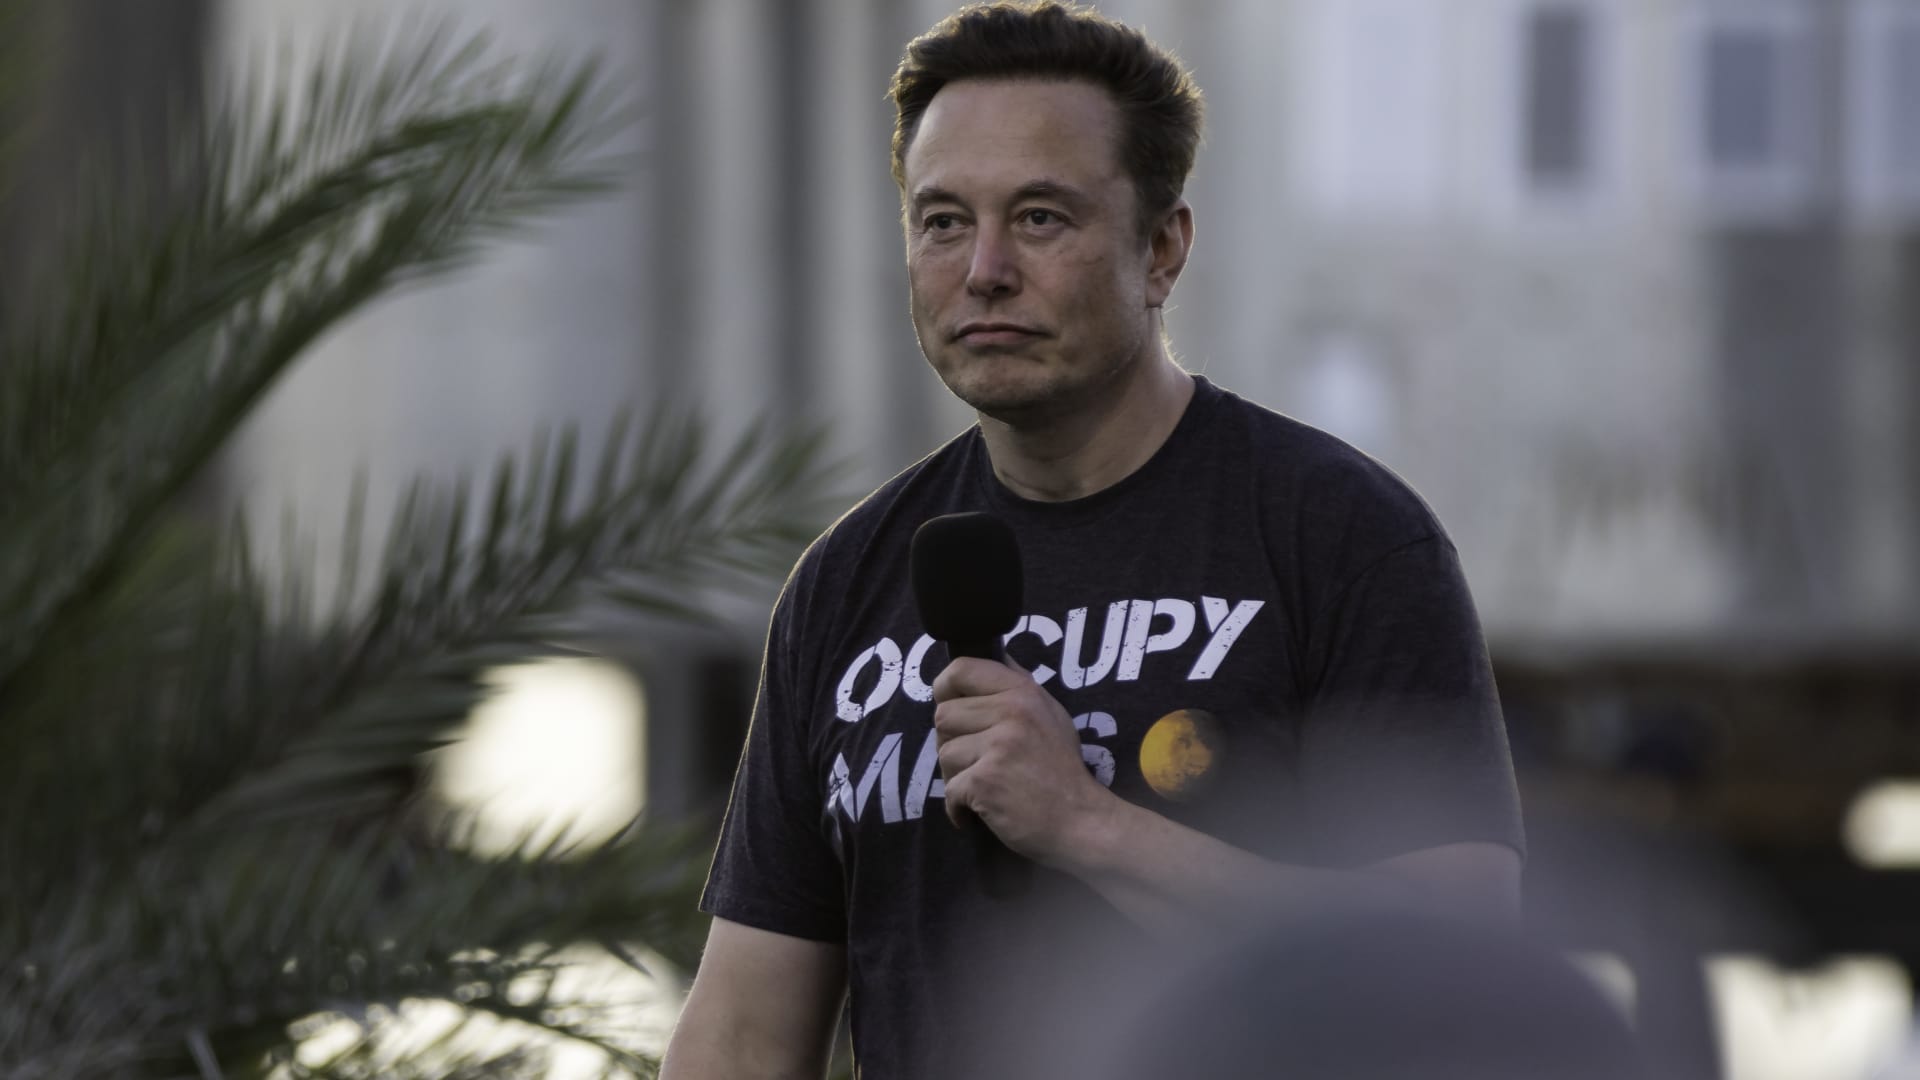 Tesla stock had its worst week since Mar. 2020 during a 'very intense 7 days' for Elon Musk